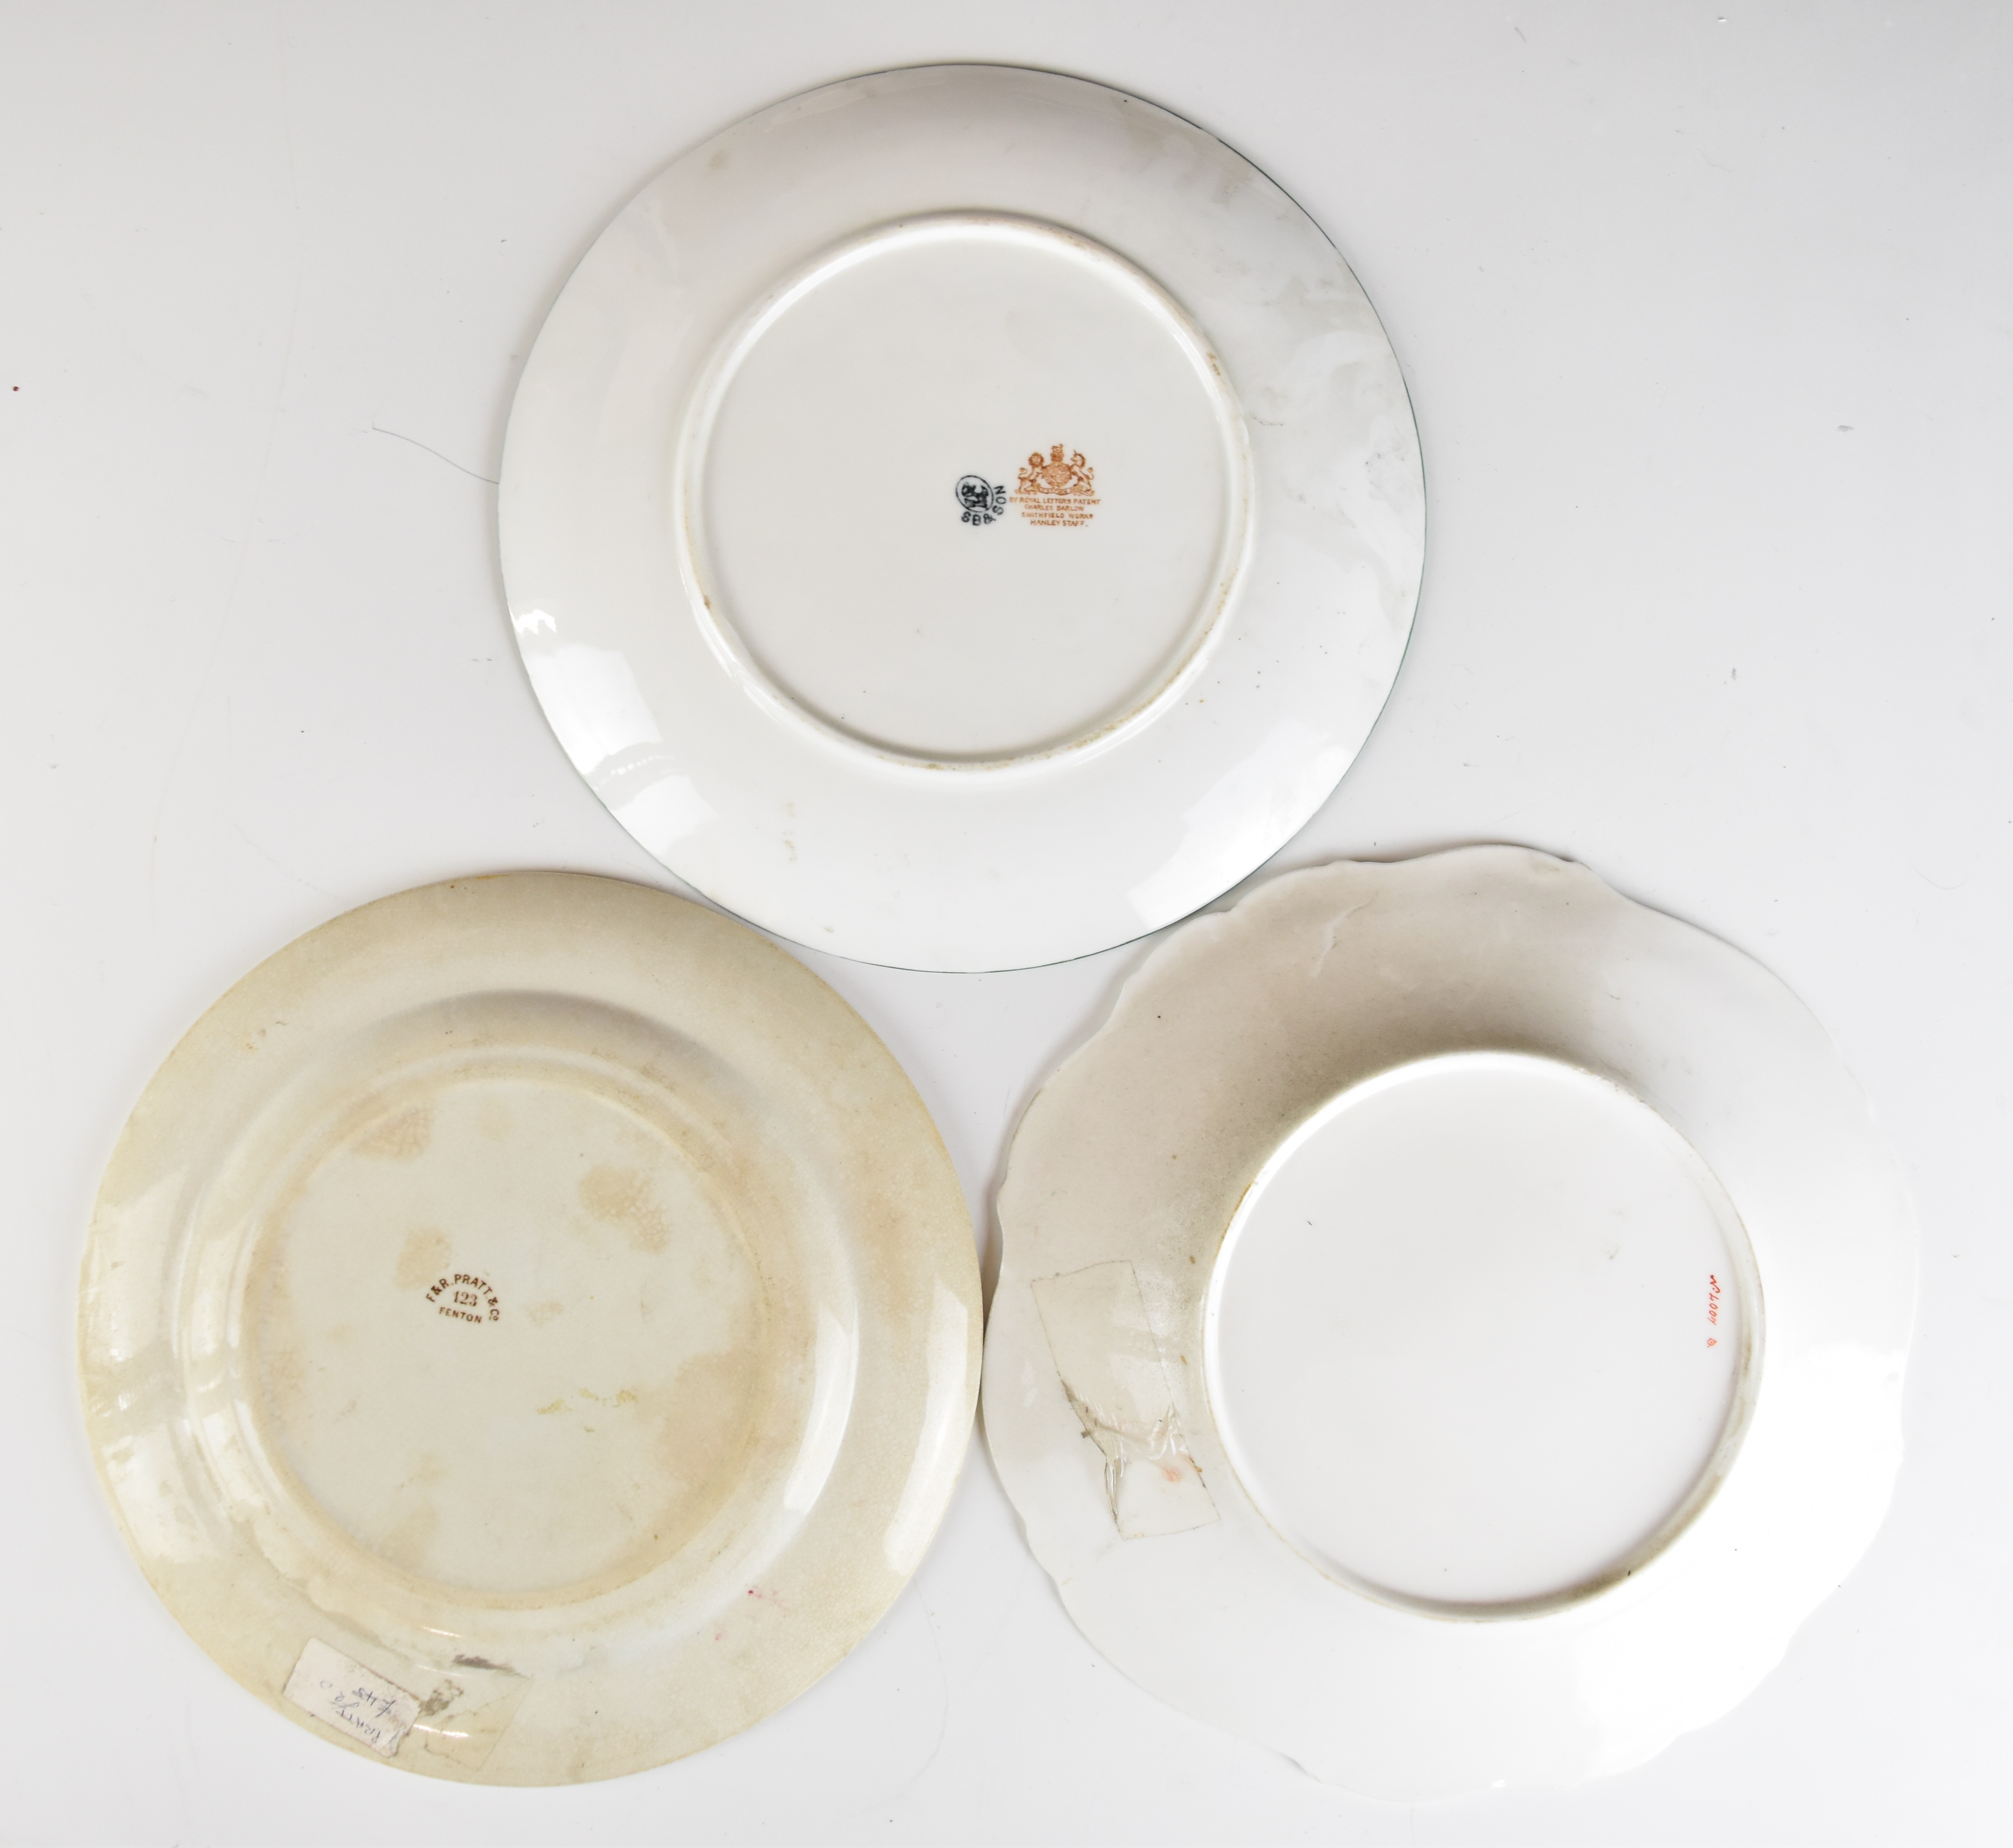 Cabinet plates including Chamberlains Worcester, Royal Worcester, Spode, several Prattware and - Image 7 of 8